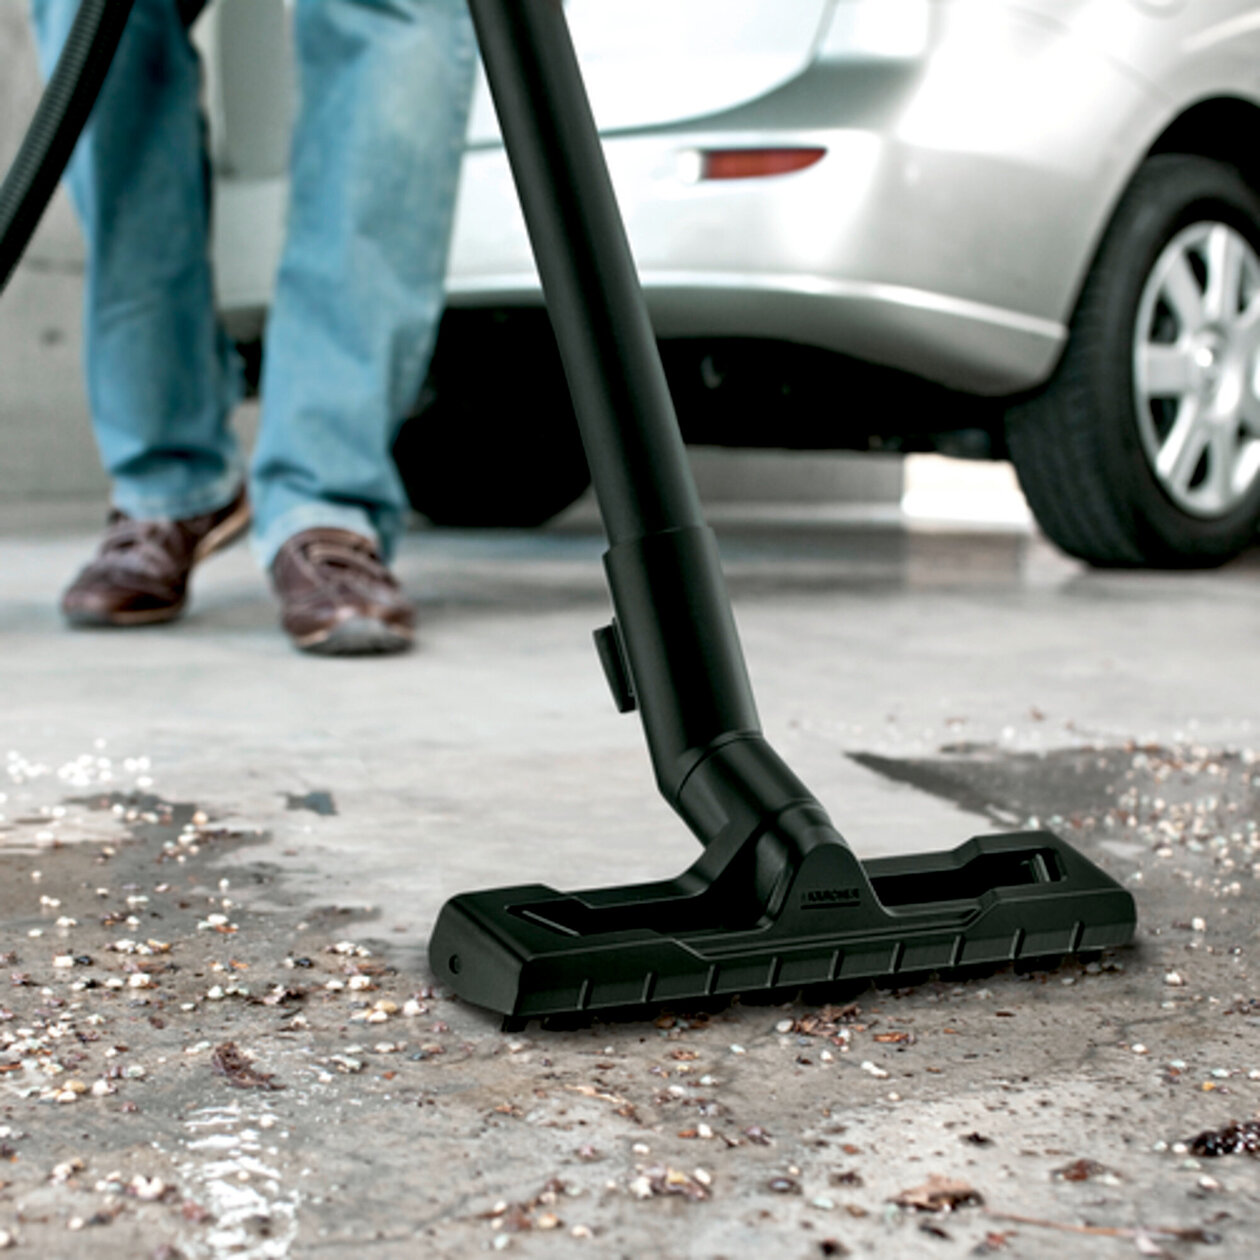 Wet and Dry Vacuum Cleaner WD 3 P: Newly developed floor nozzle and suction hose